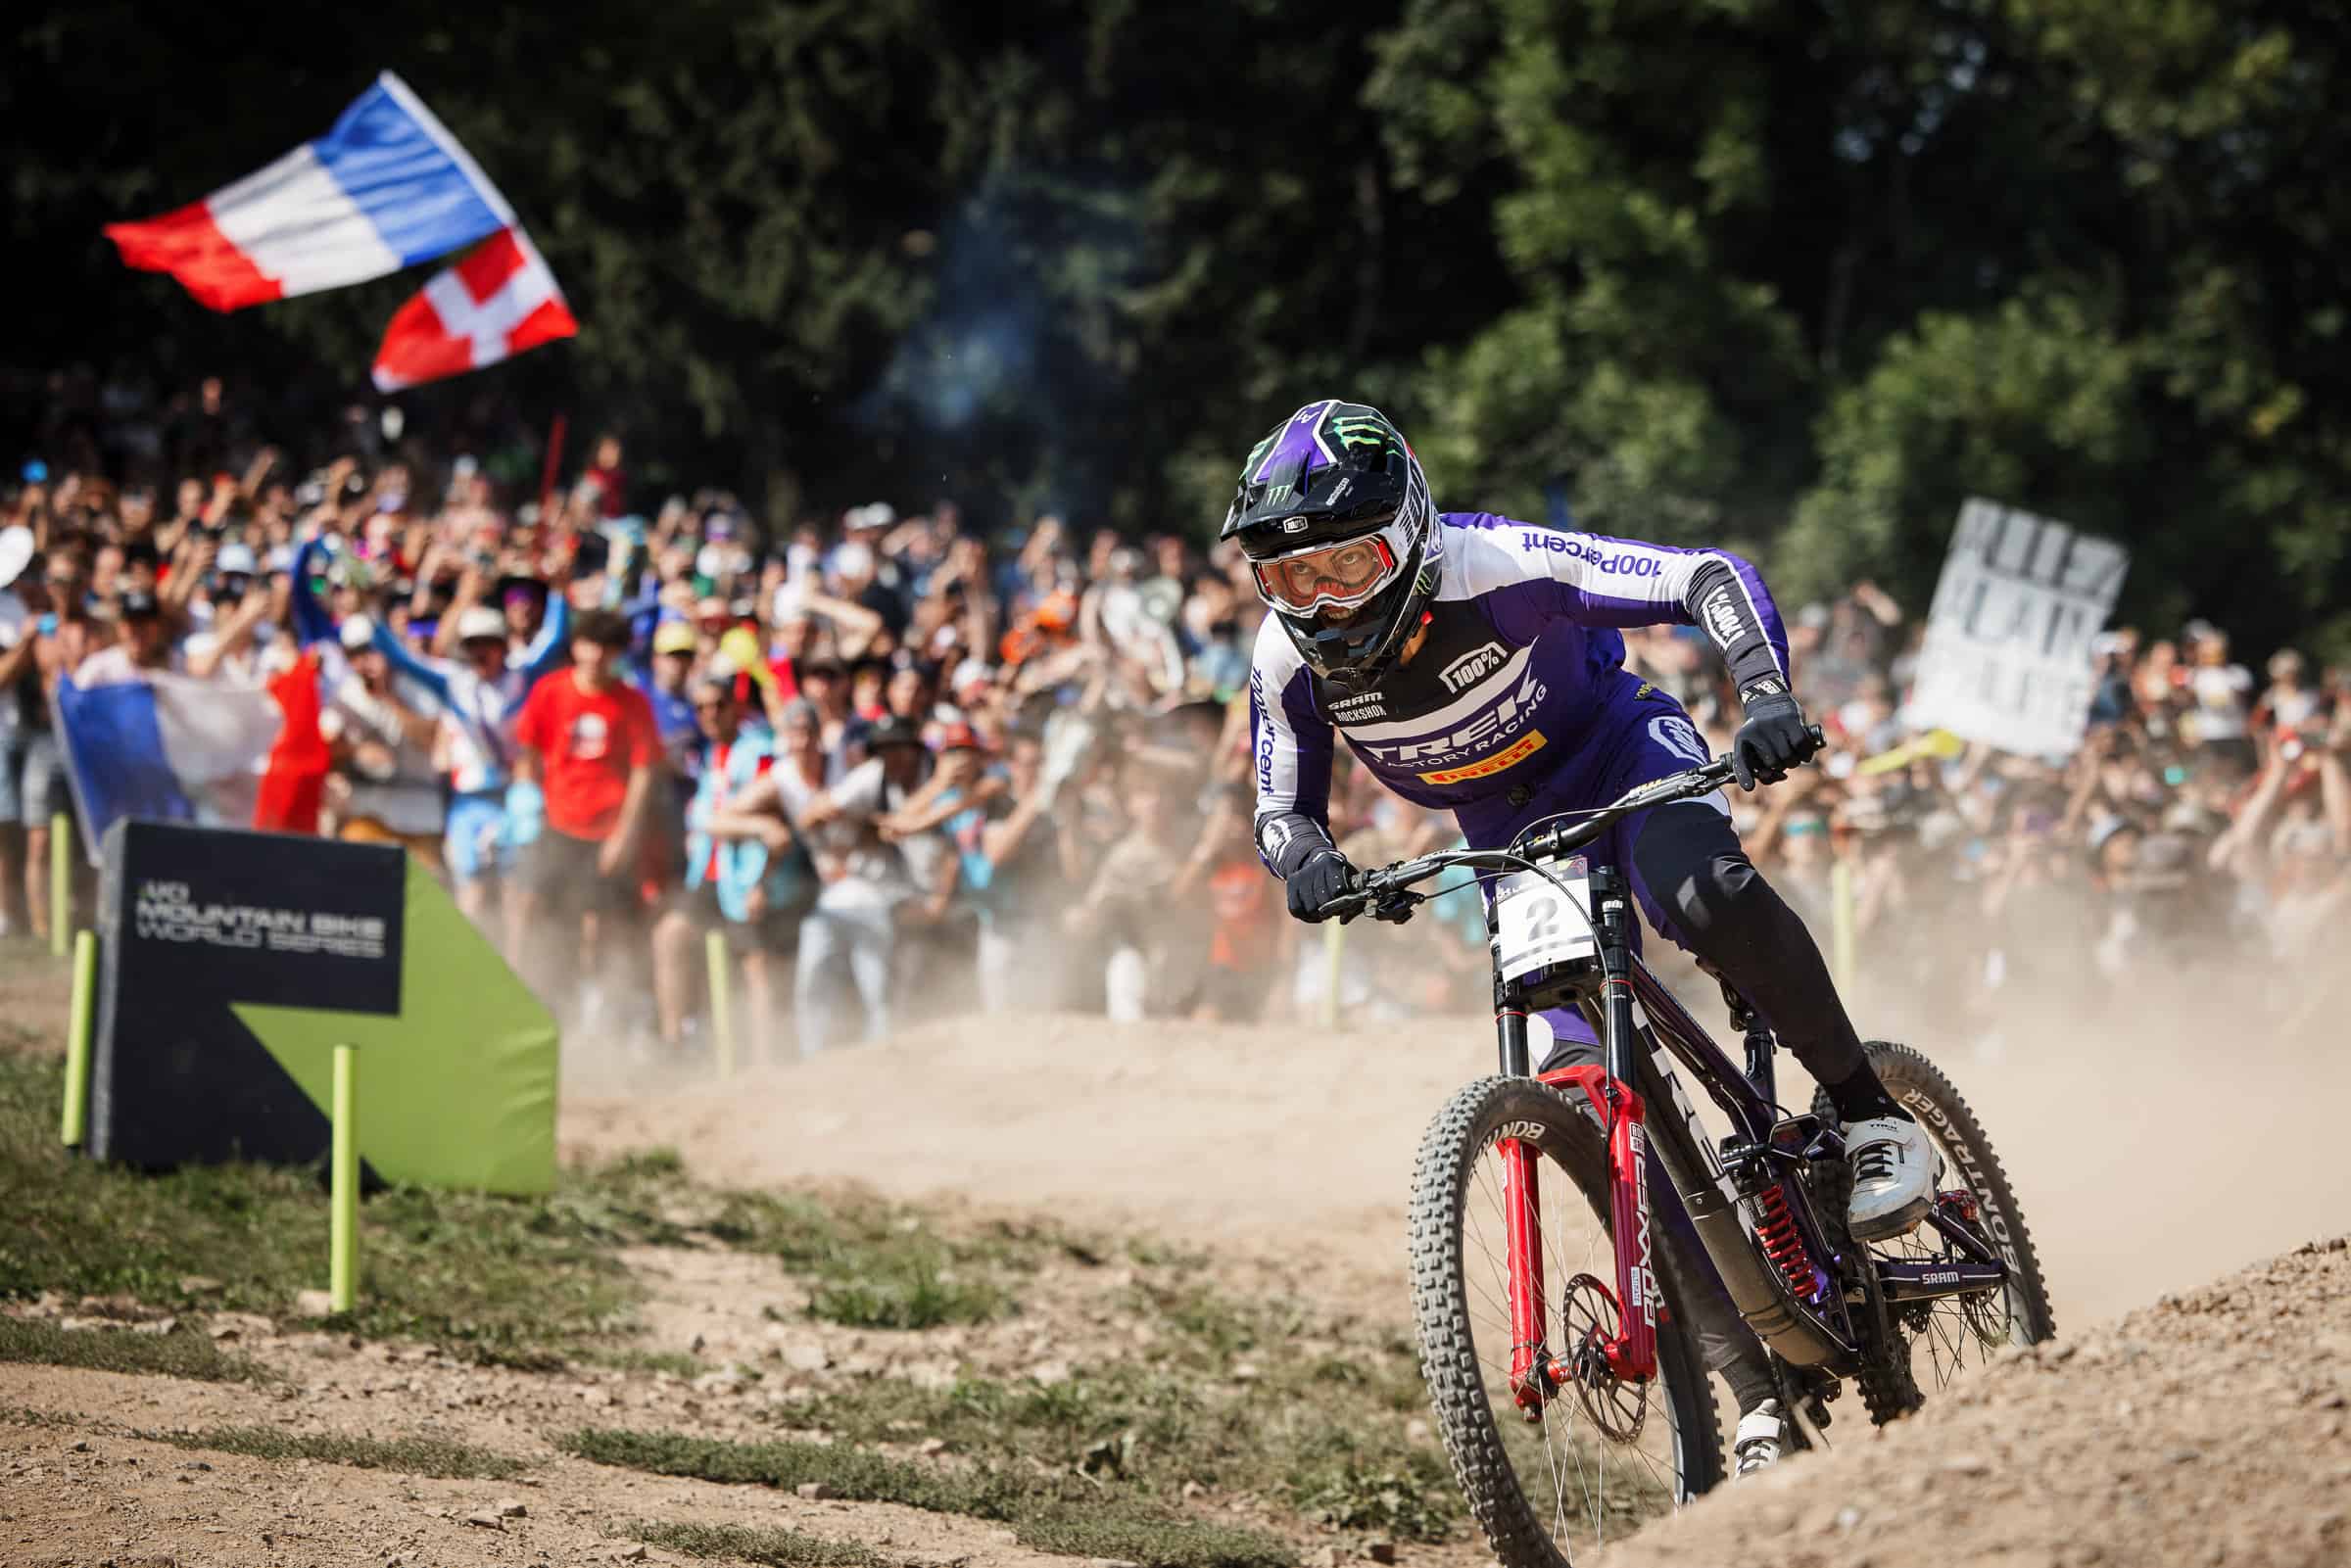 HAUTE-SAVOIE TO HOST HUGE WEEKEND OF WHOOP UCI MOUNTAIN BIKE WORLD SERIES IN LES GETS FOR SECOND CONSECUTIVE YEAR